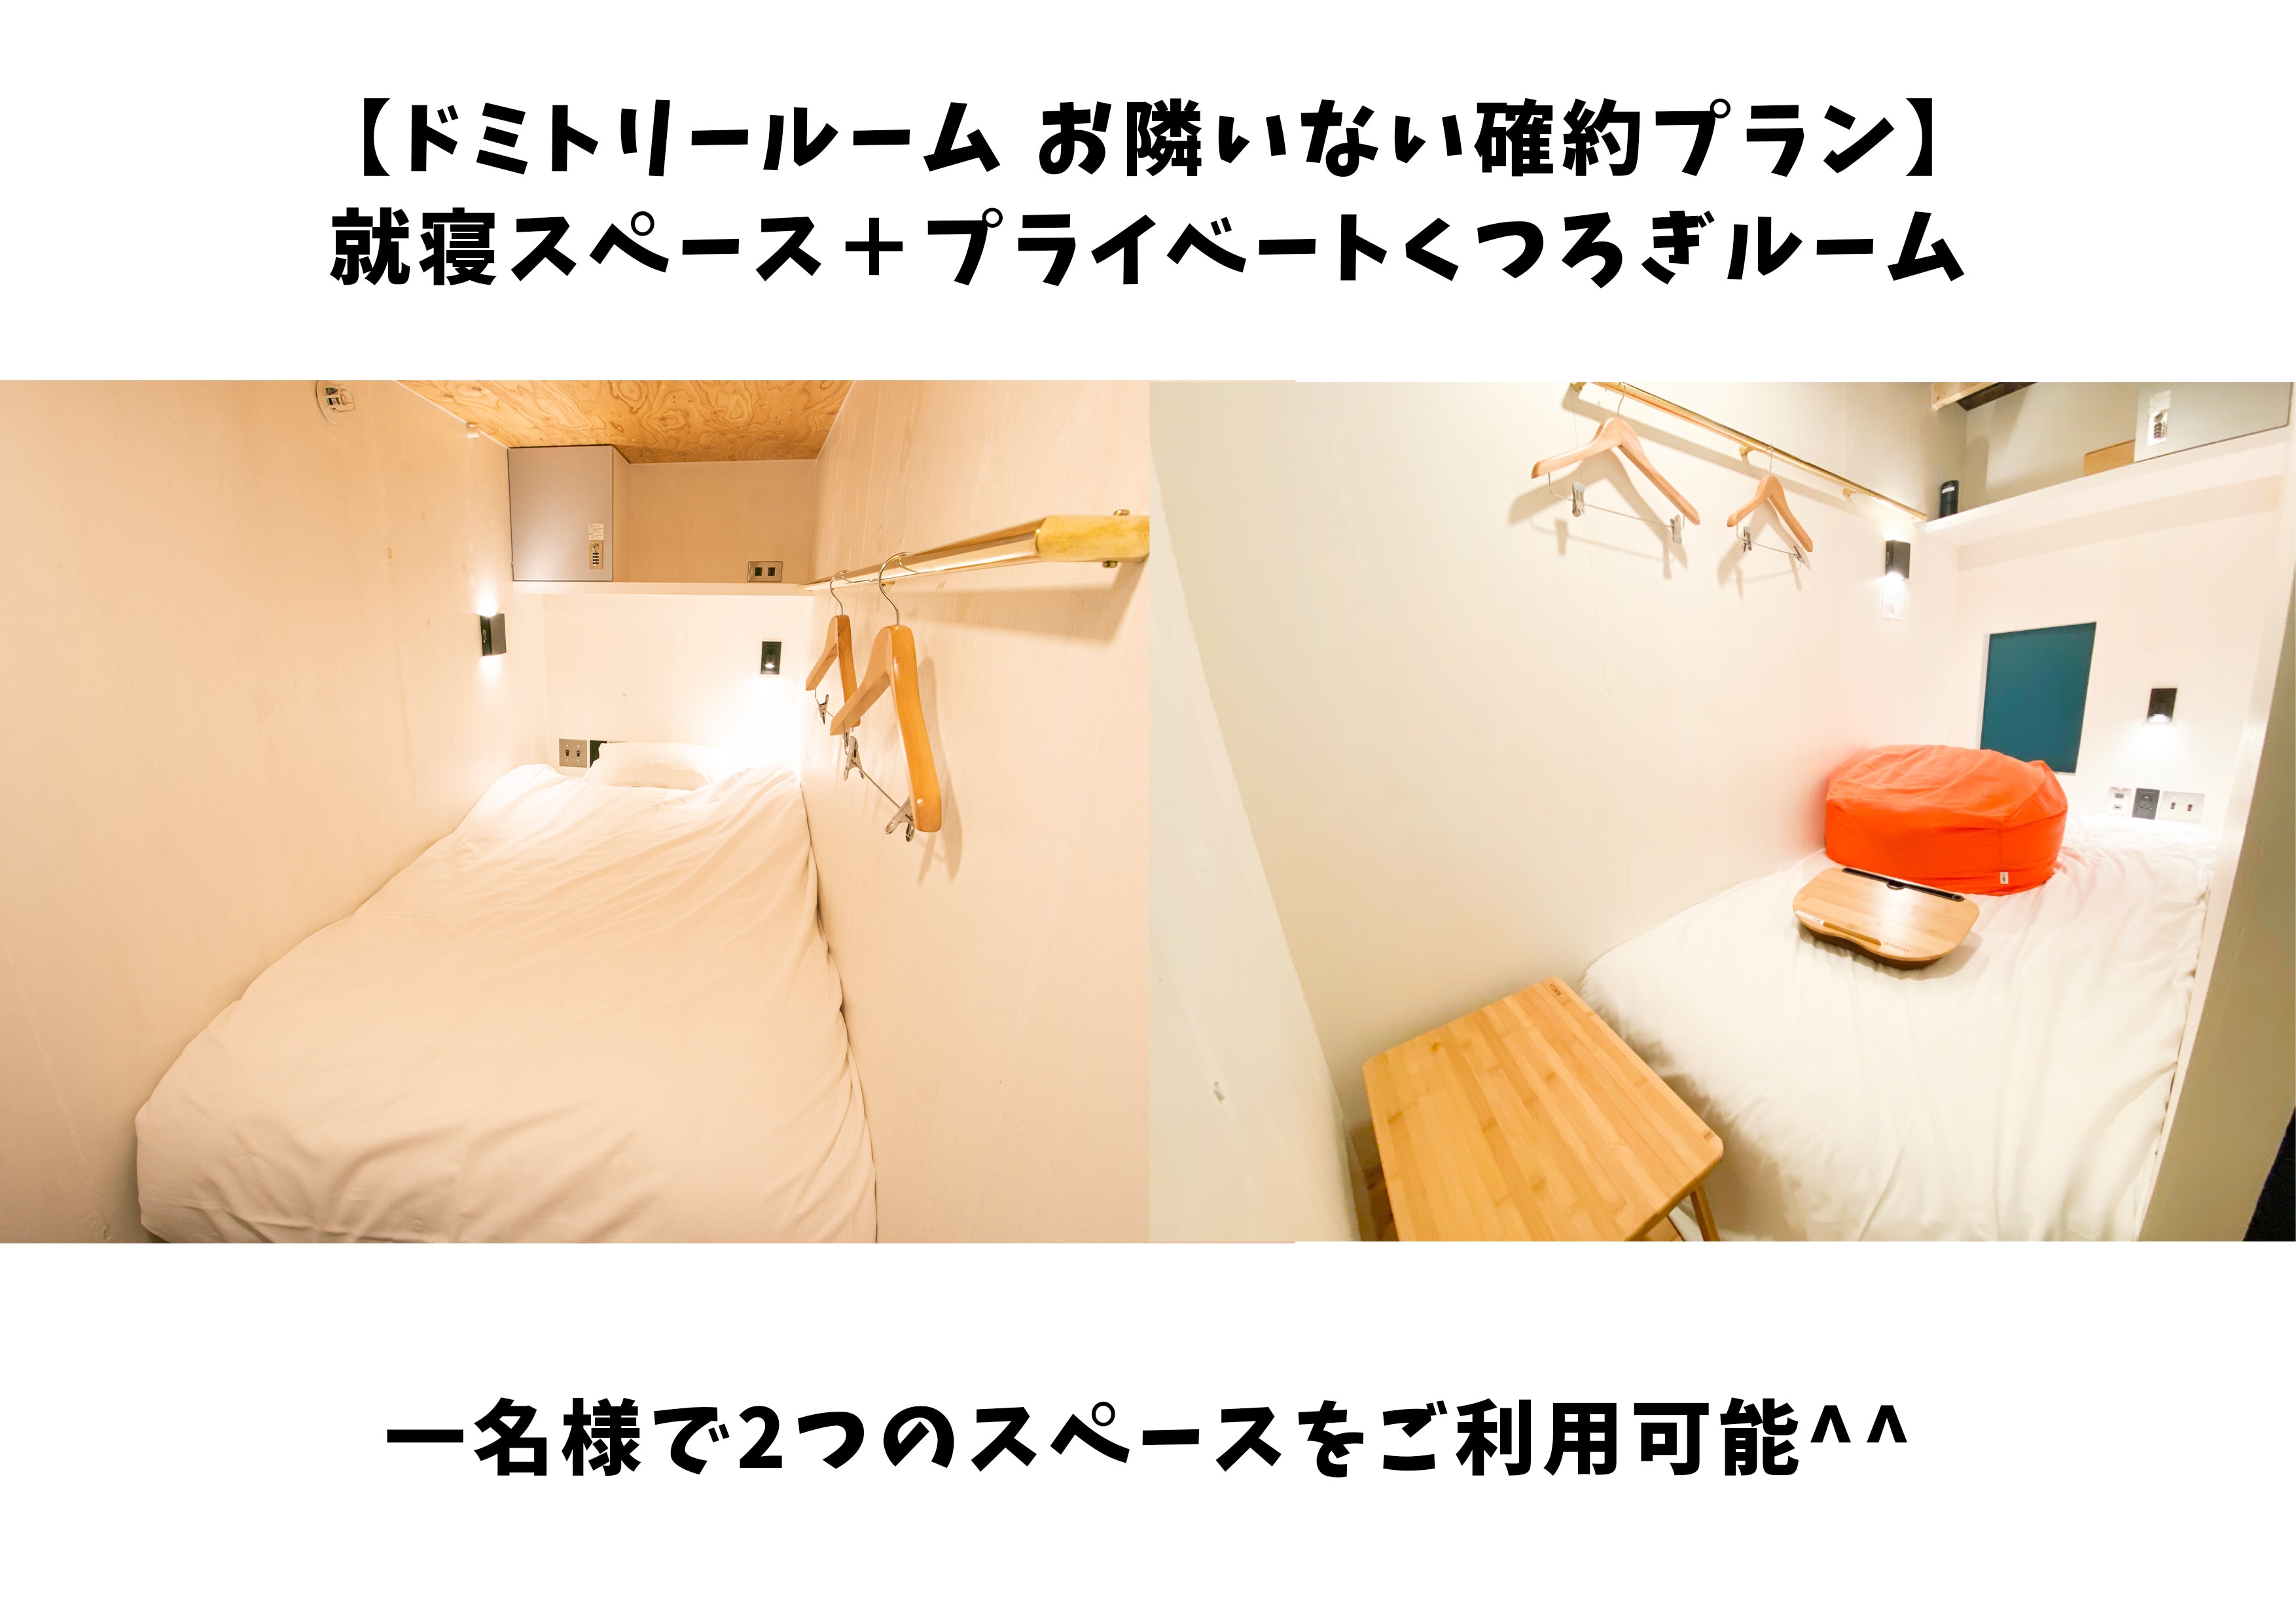 Hotel information and reservations for Theatel Sapporo | Rakuten